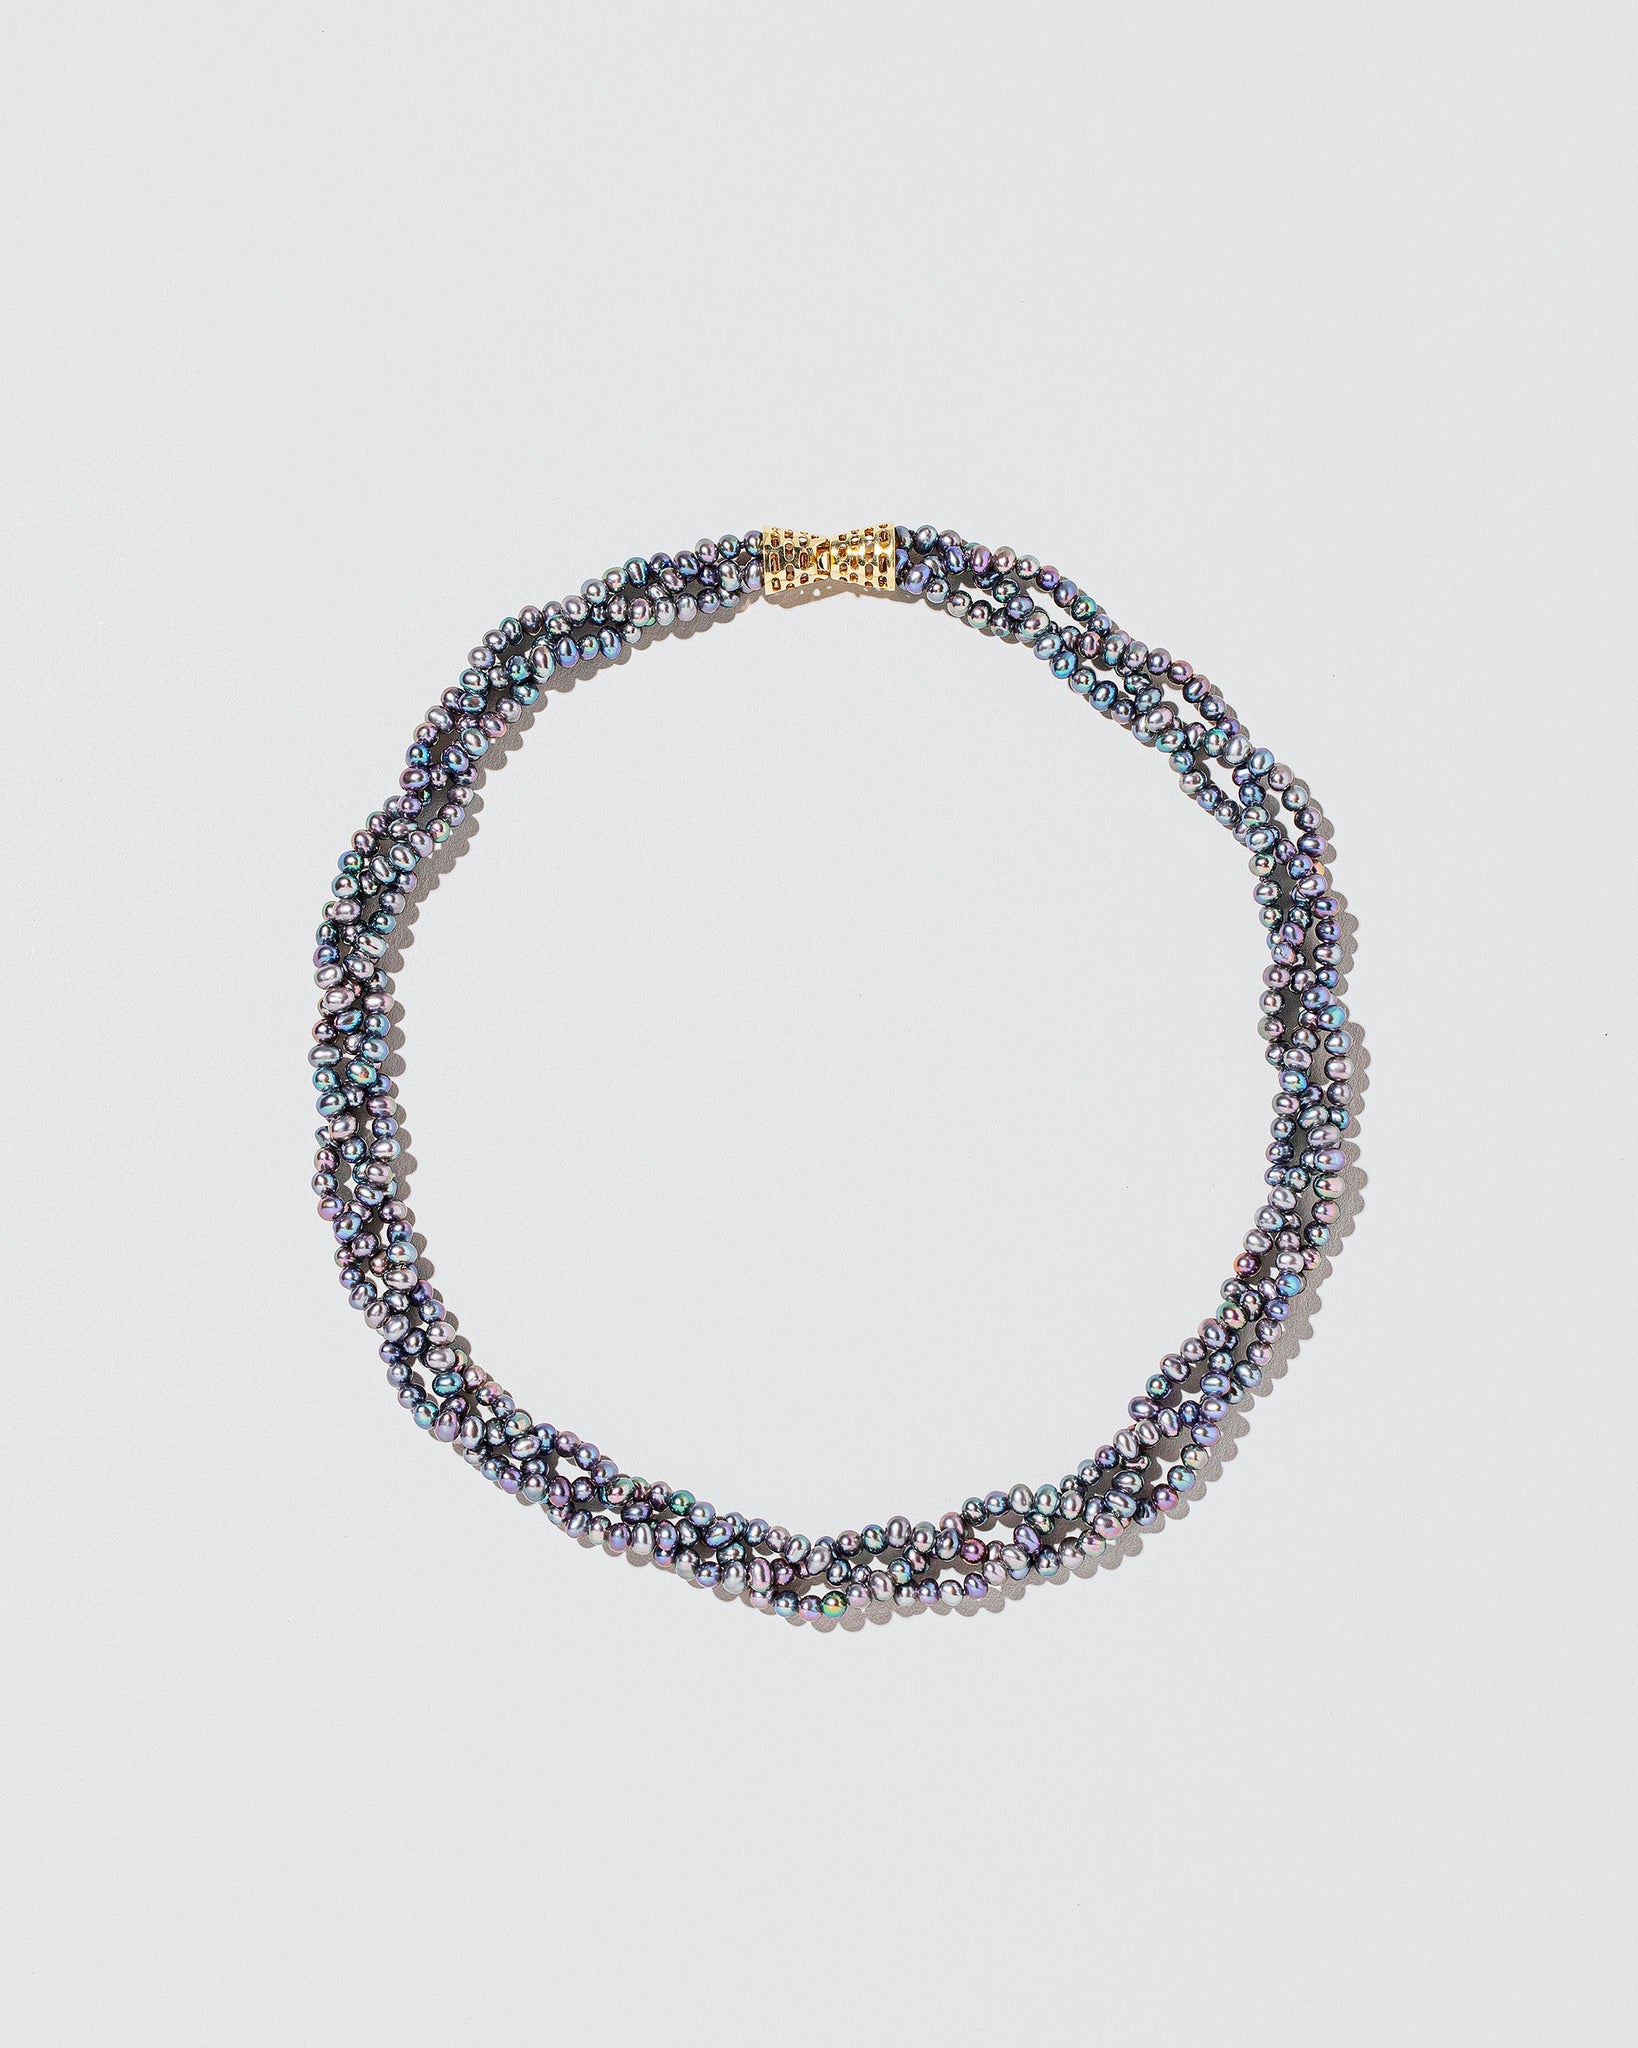  Braided Seed Pearl Choker on light color background.